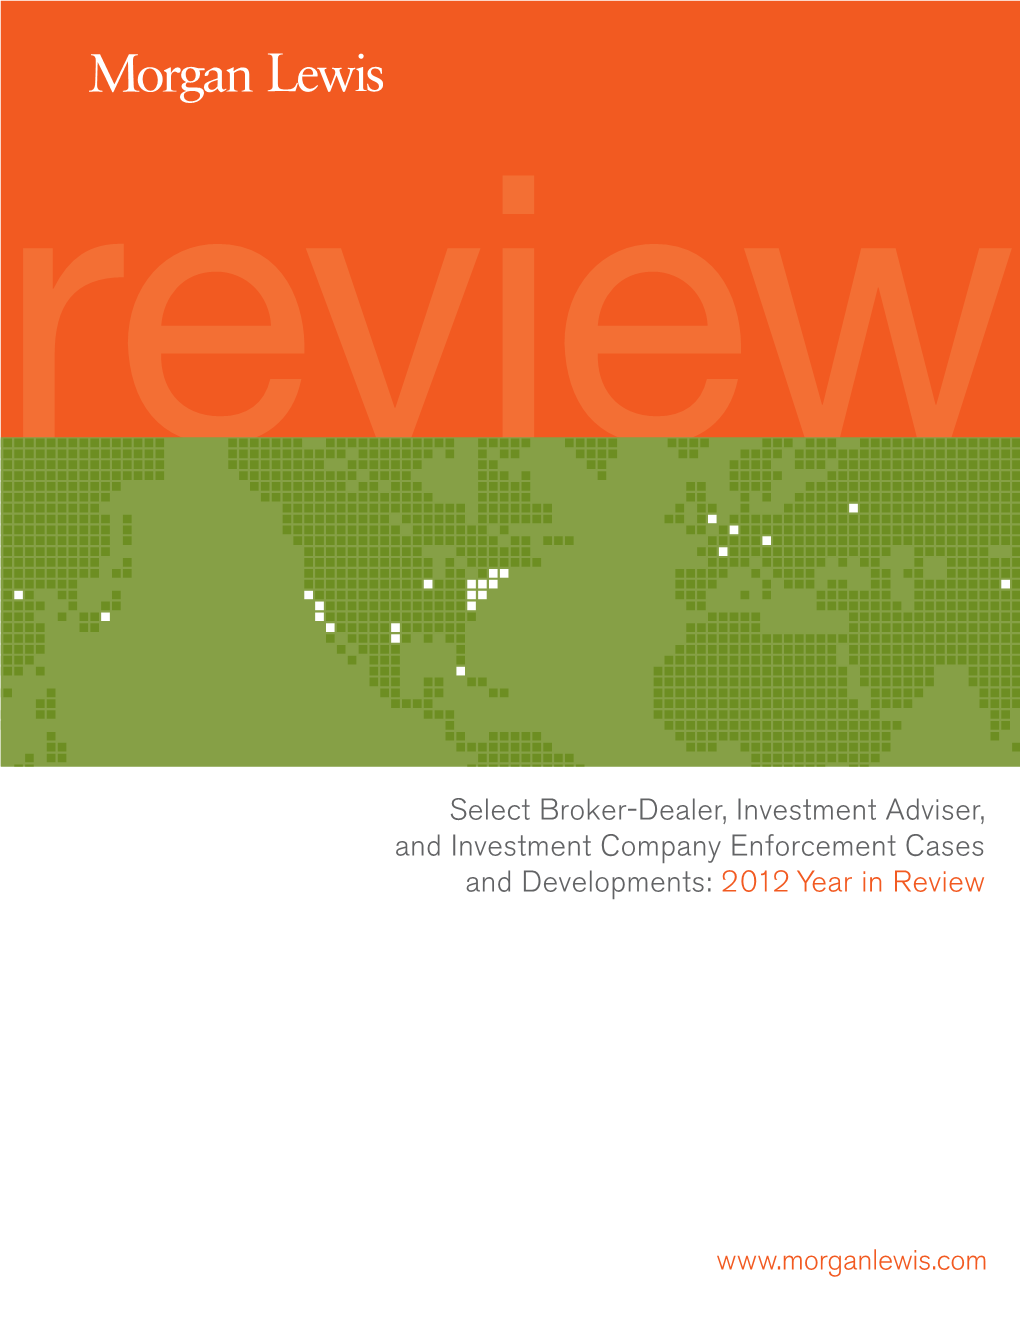 Select Broker-Dealer, Investment Adviser, and Investment Company Enforcement Cases and Developments: 2012 Year in Review